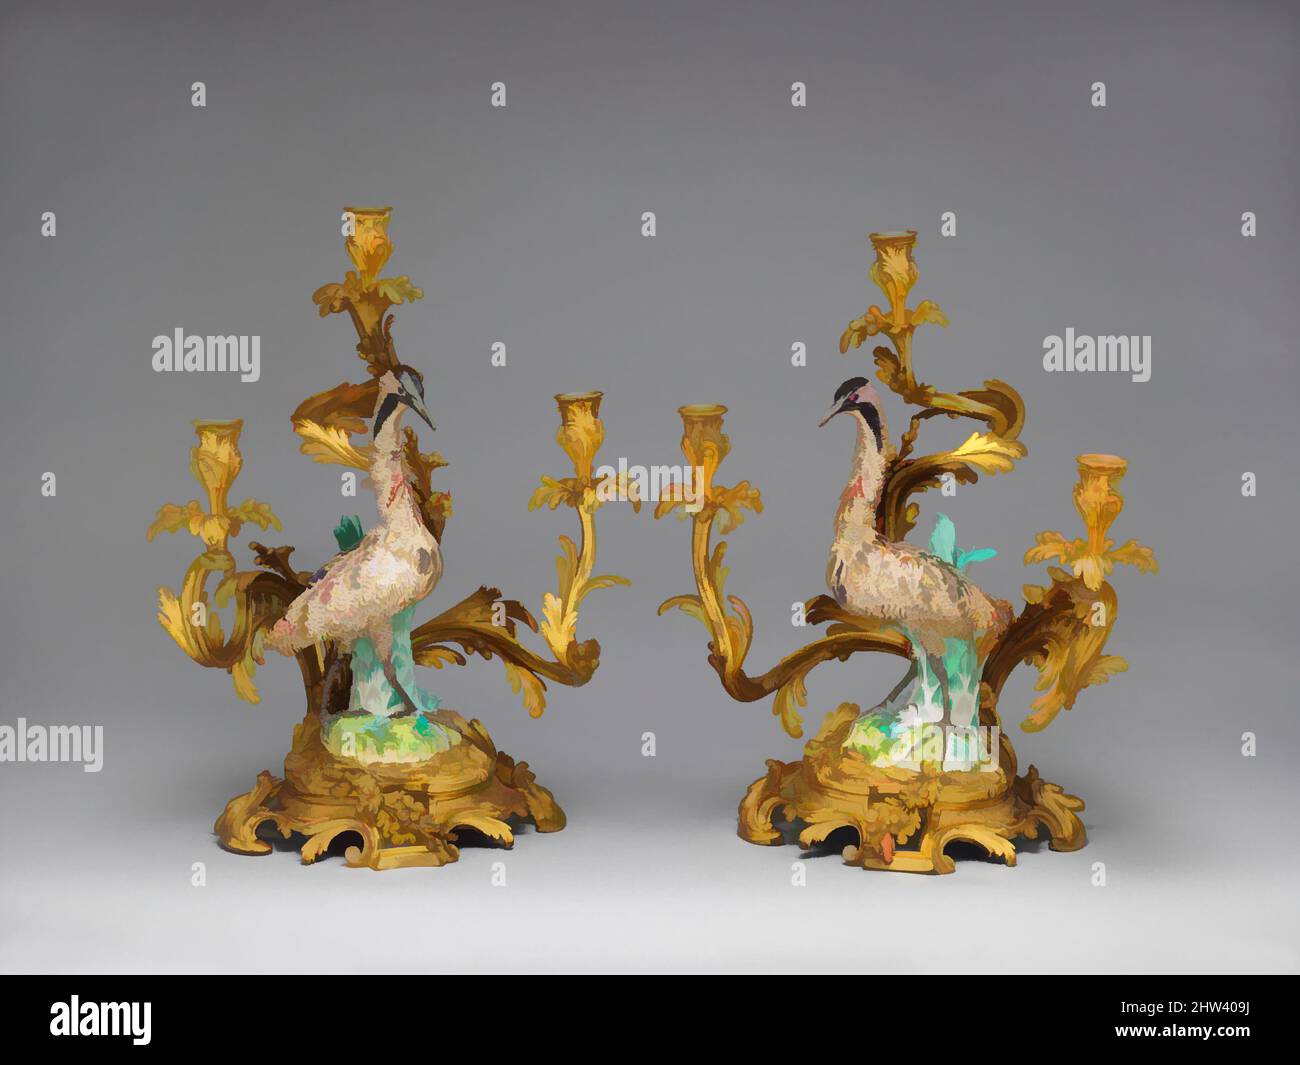 Art inspired by Three-light candelabra (candélabra or girandole) (one of a pair), ca. 1750, German, Meissen with French (Paris) mounts, Hard-paste porcelain; gilt-bronze mounts, Height (overall): 22 in. (55.9 cm), Ceramics-Porcelain, Trained as a sculptor, Johann Joachim Kändler joined, Classic works modernized by Artotop with a splash of modernity. Shapes, color and value, eye-catching visual impact on art. Emotions through freedom of artworks in a contemporary way. A timeless message pursuing a wildly creative new direction. Artists turning to the digital medium and creating the Artotop NFT Stock Photo